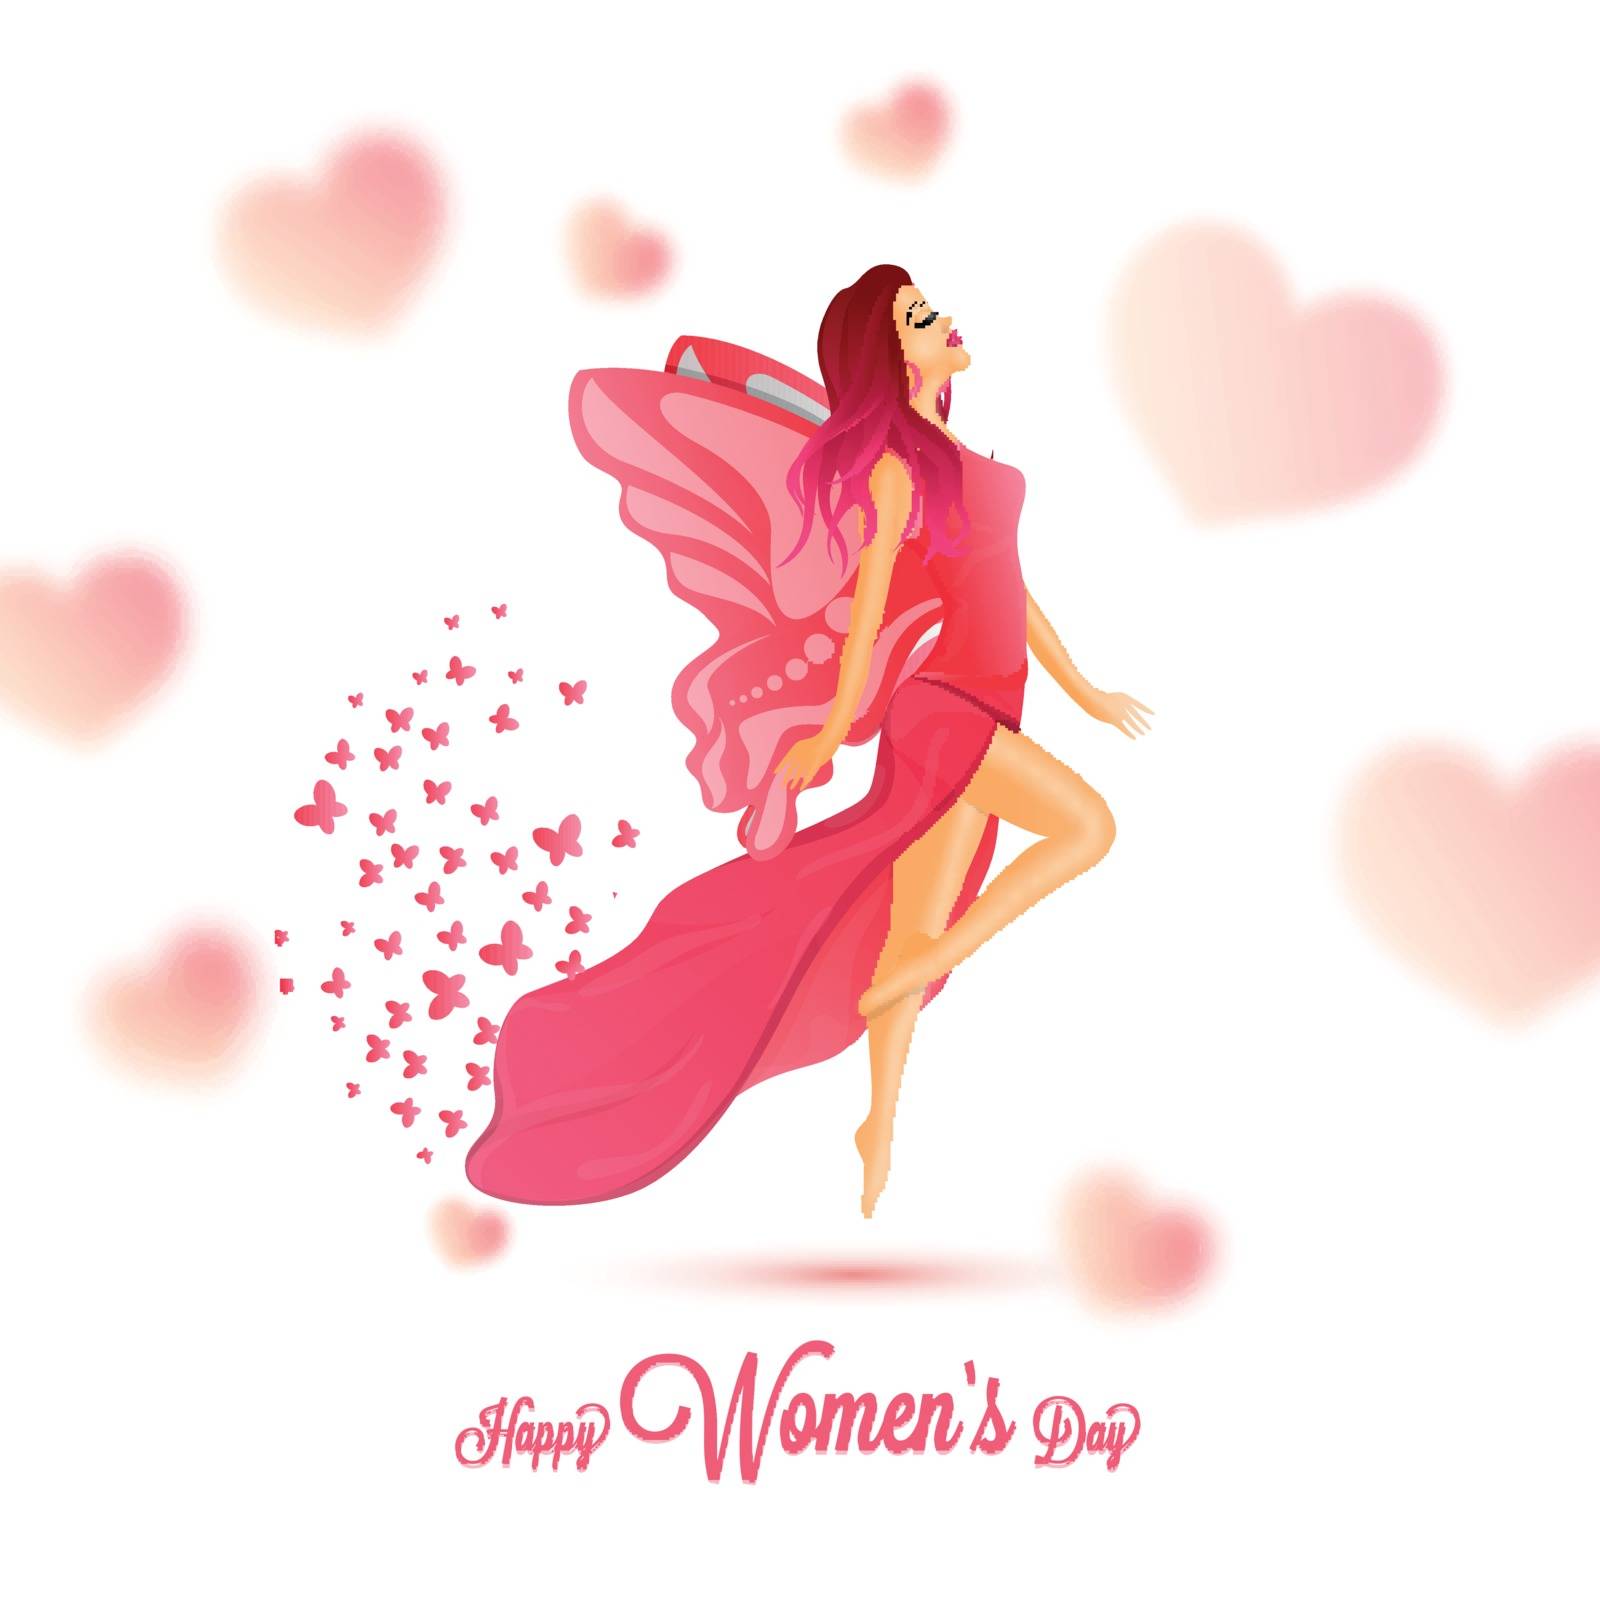 Happy Women's Day celebration greeting card design, illustration by aispl